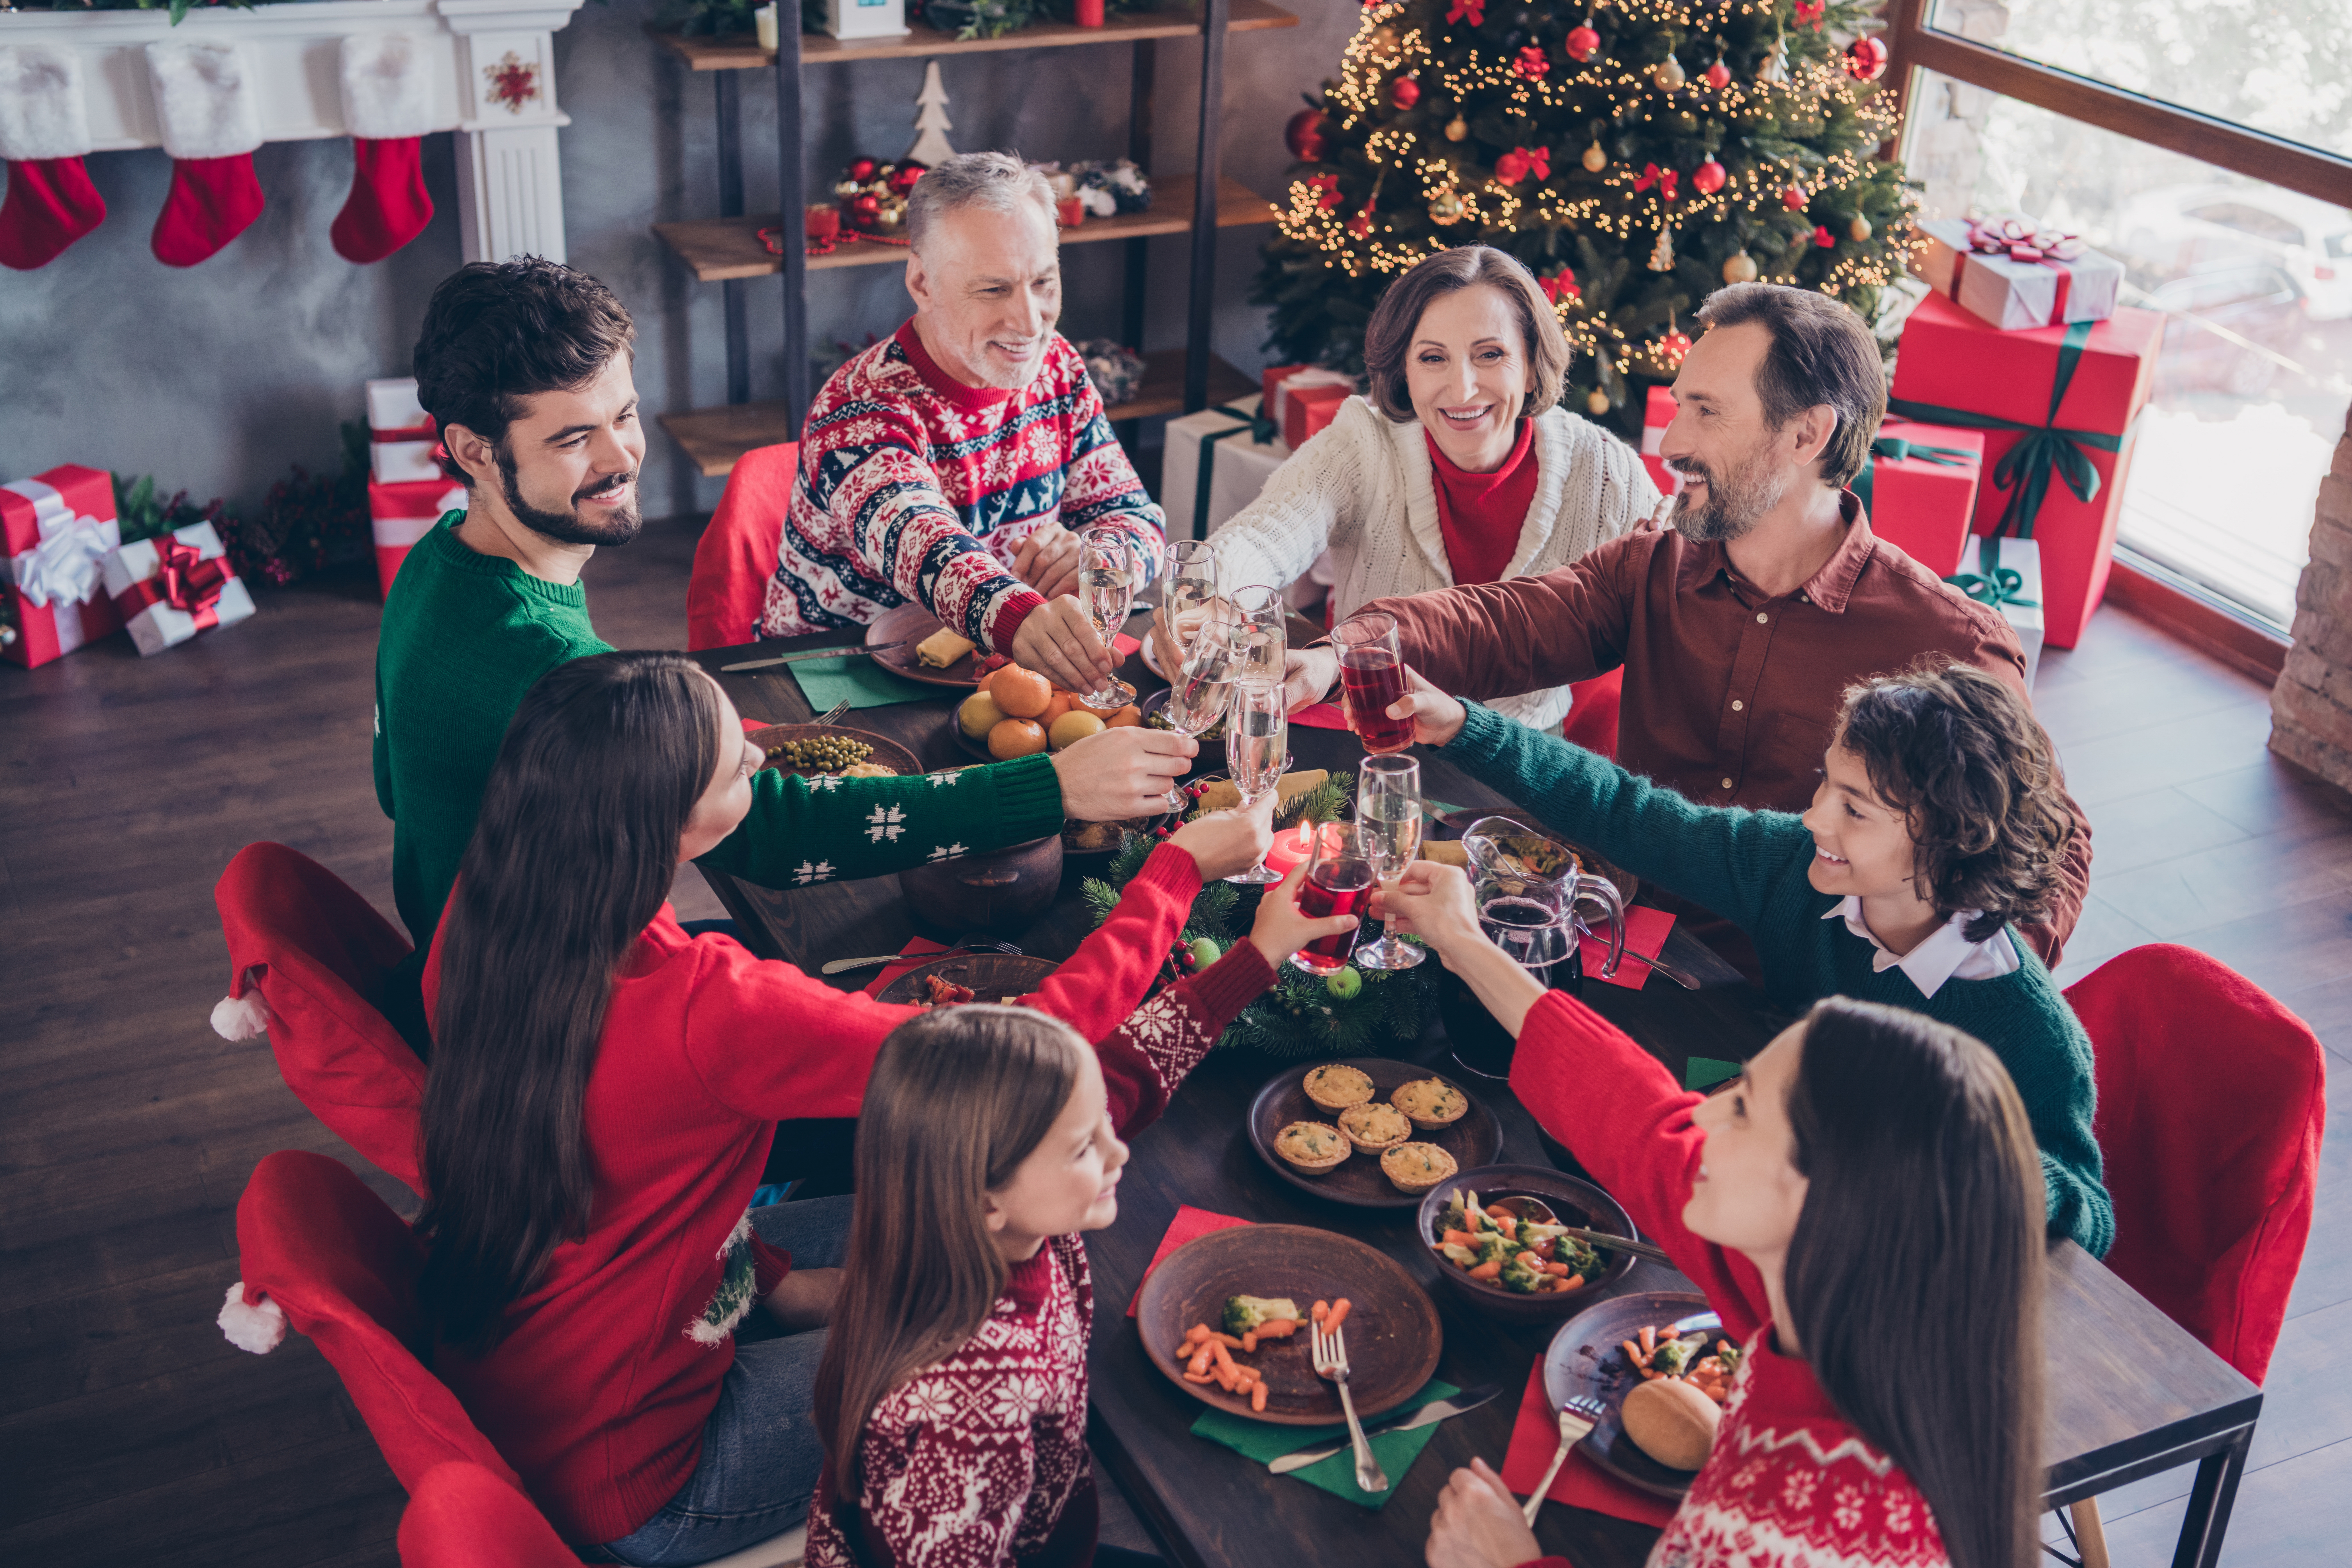 A family gathered for Christmas | Source: Shutterstock